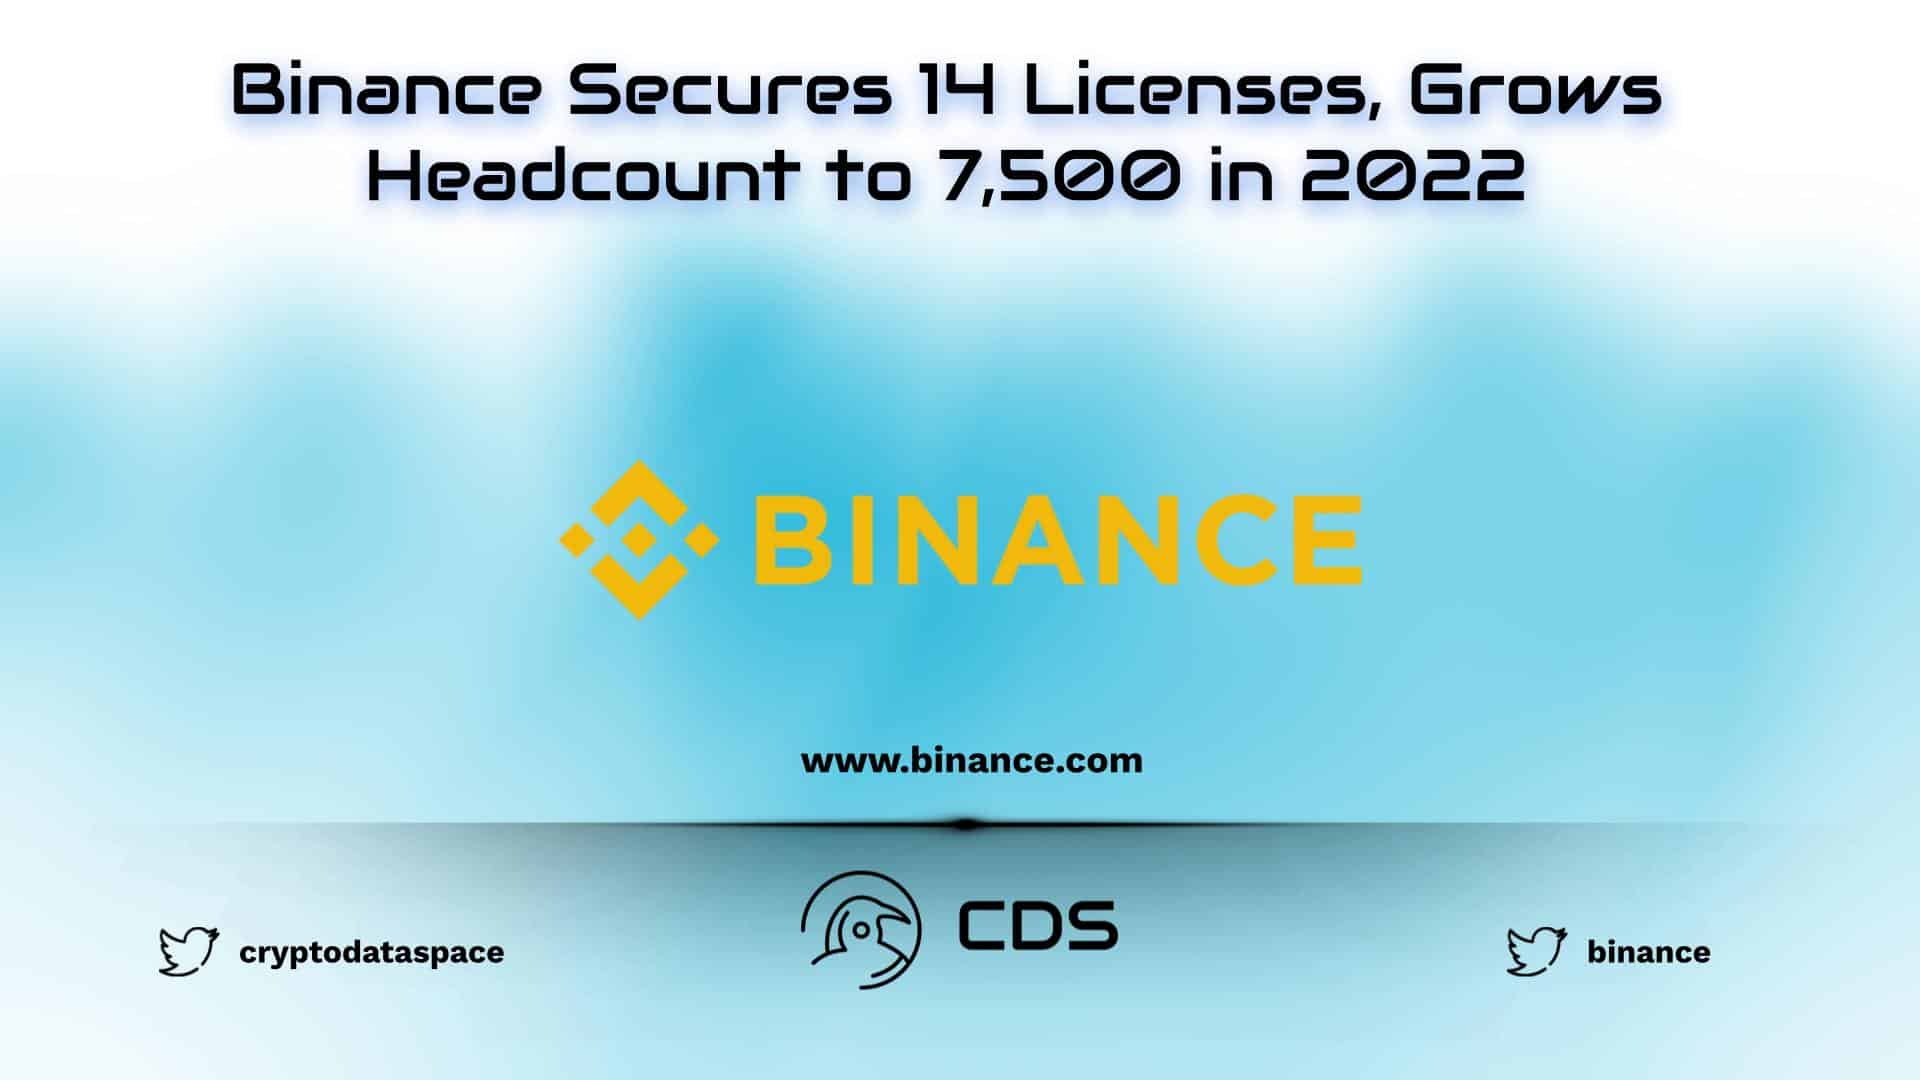 Binance Secures 14 Licenses, Grows Headcount to 7,500 in 2022